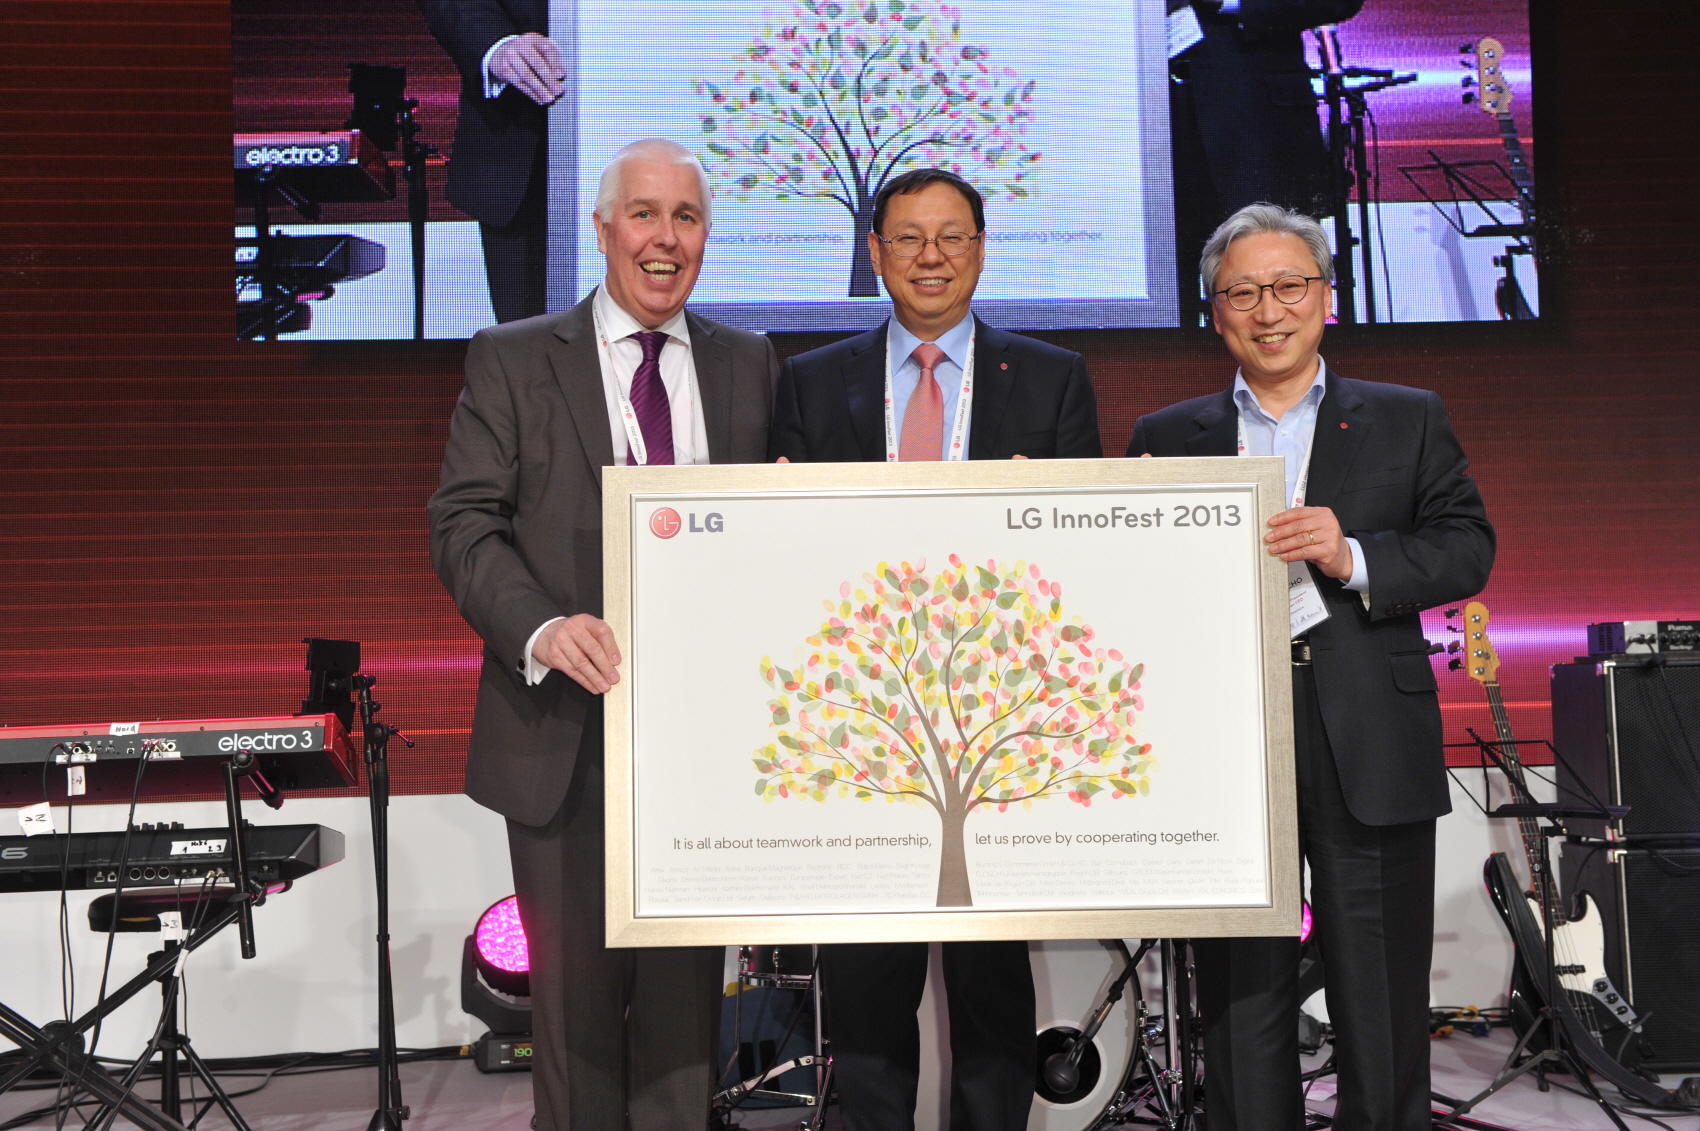 Seong-jin Jo, president and CEO of the LG Home Appliance Company, holds up the LG InnoFest 2013 slogan with two men at InnoFest 2013 in Berlin